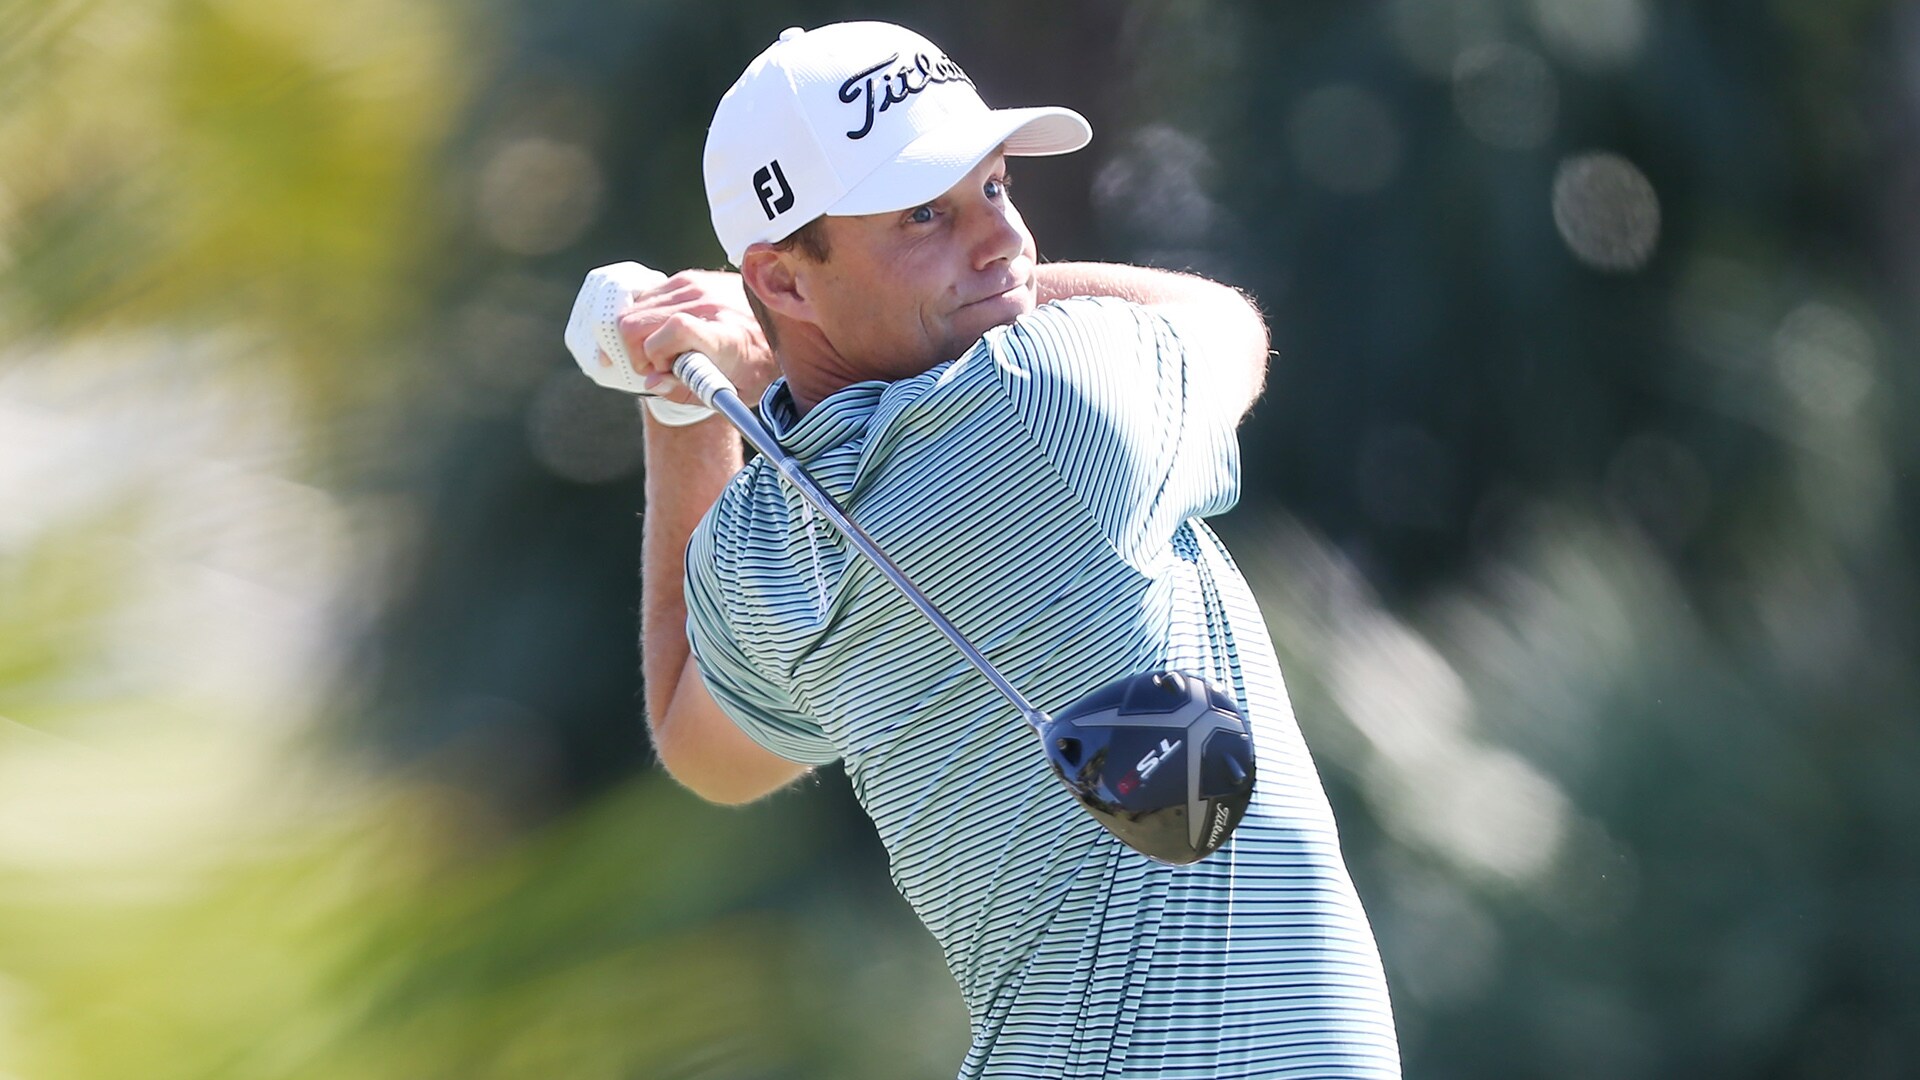 Nick Watney tests positive for coronavirus, WDs from RBC Heritage